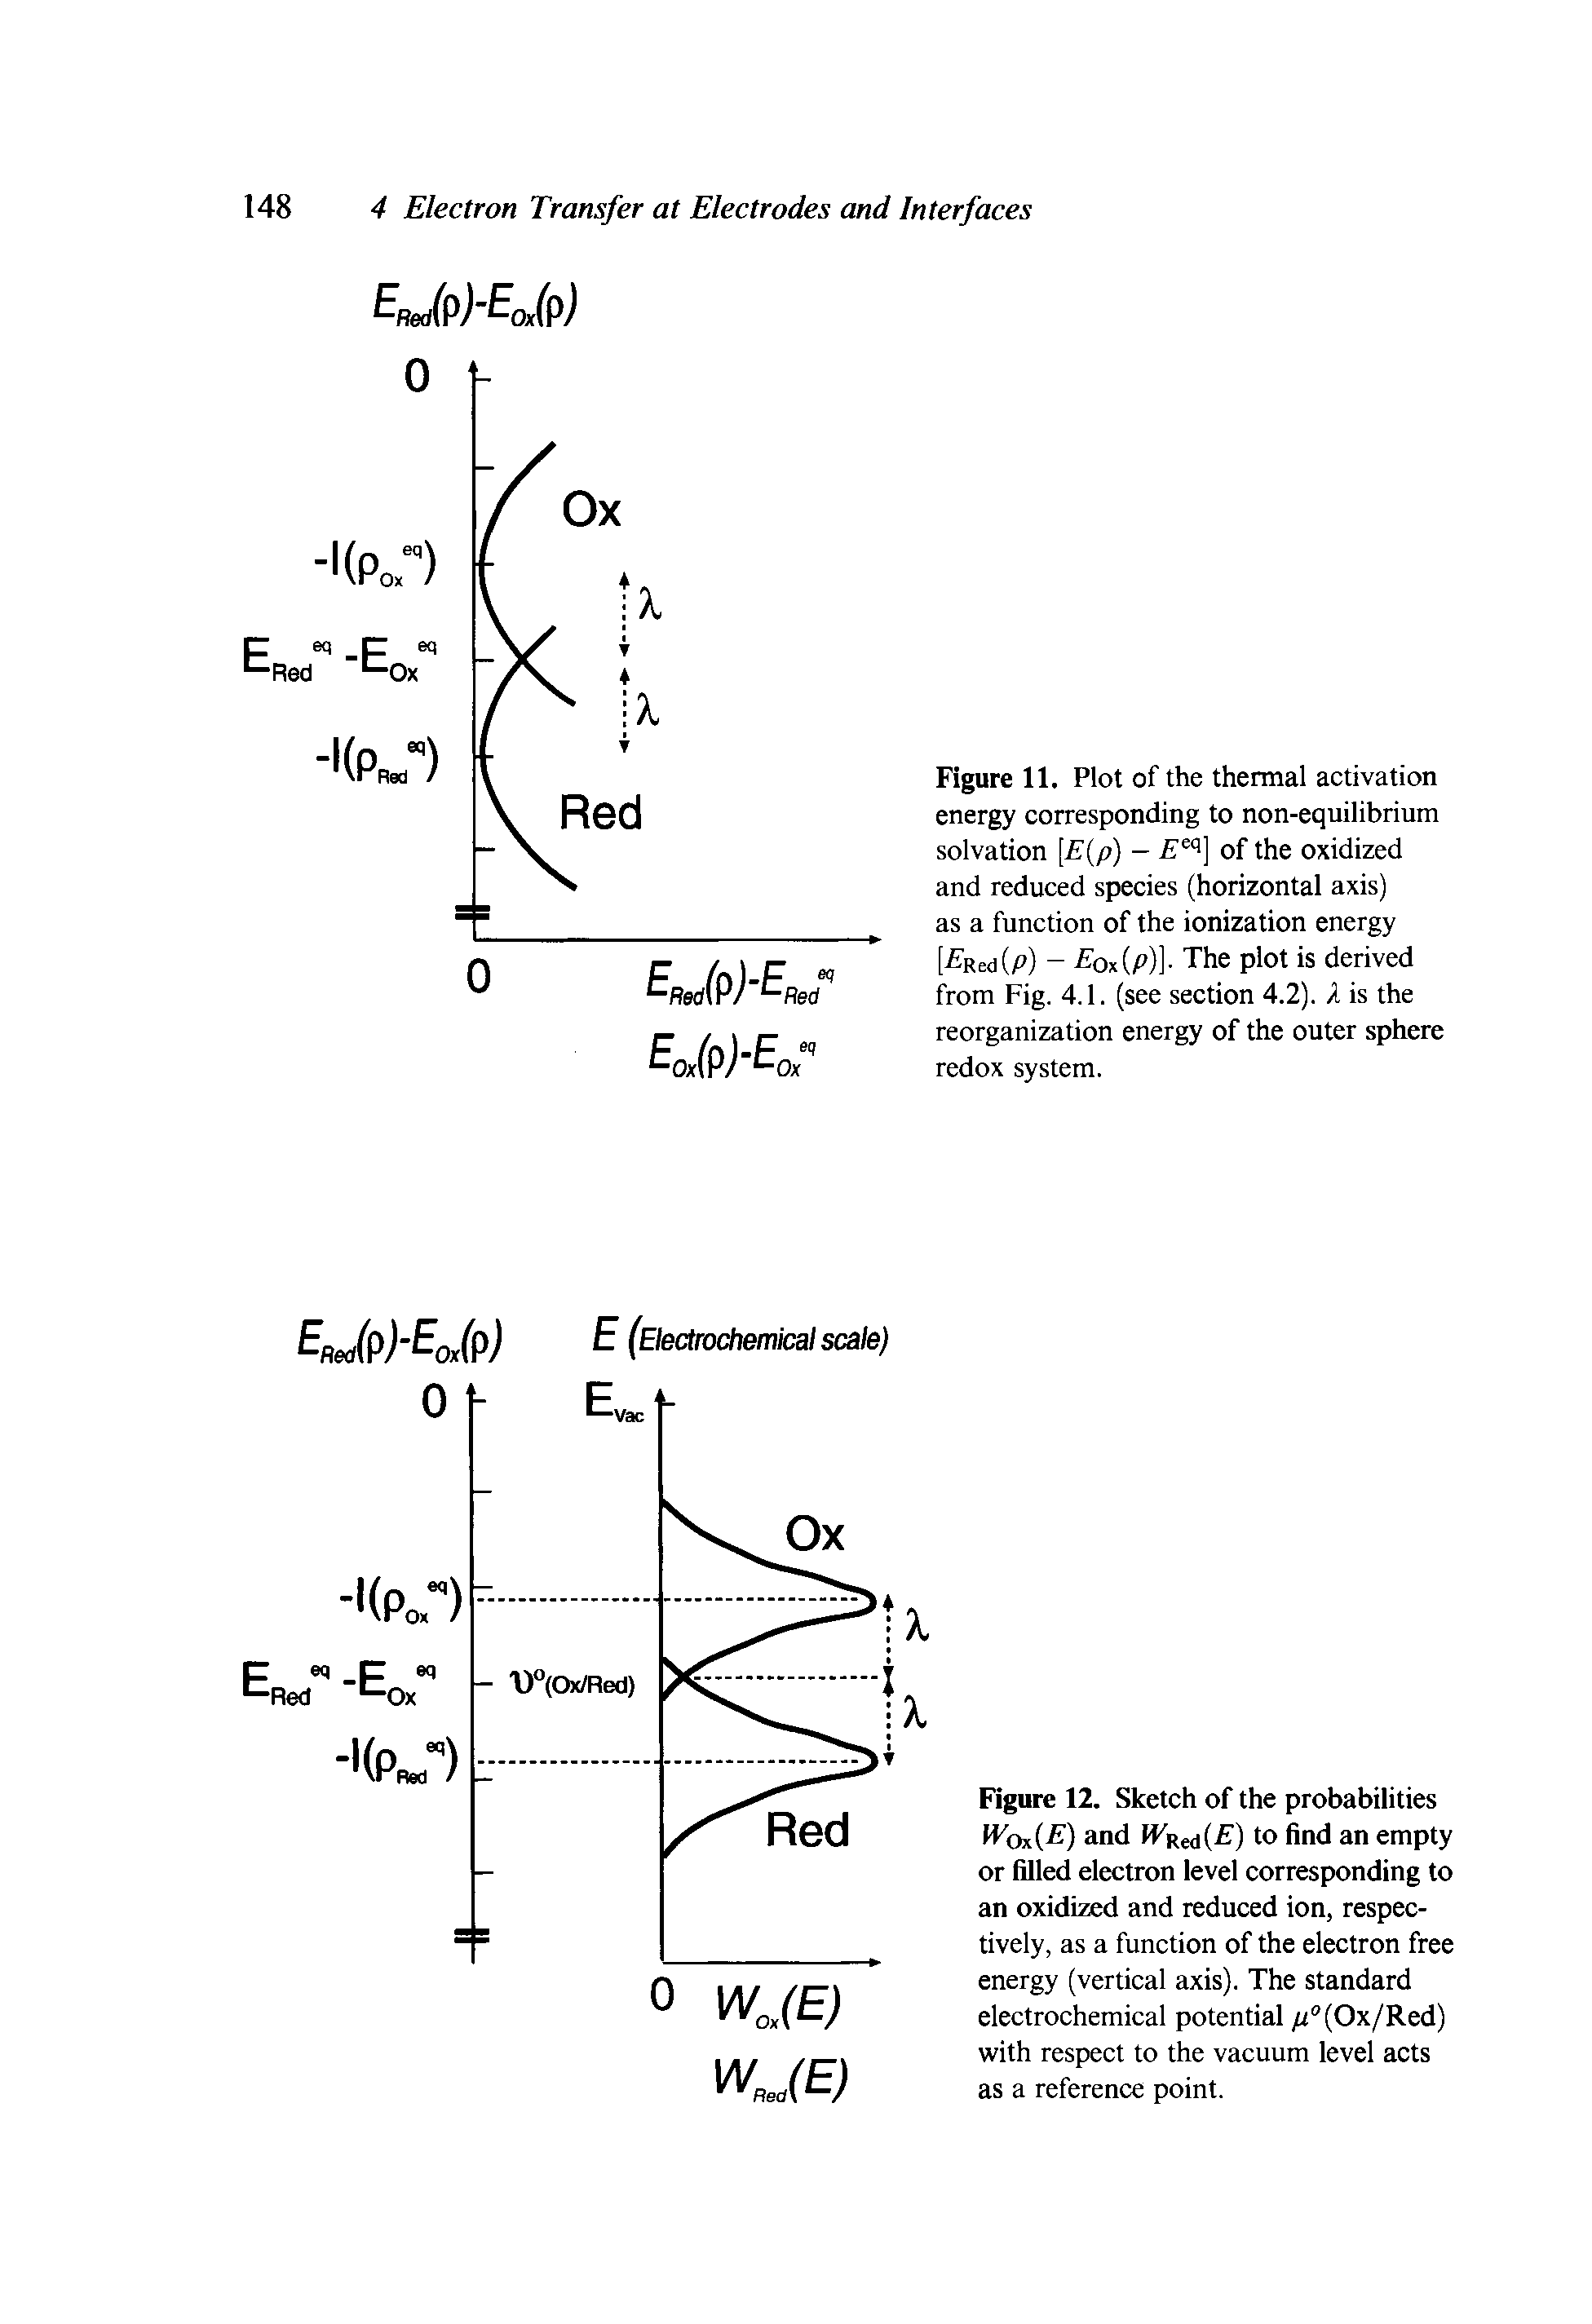 Figure 12. Sketch of the probabiiities Wo (E) and fkRMi( ) to find an empty or filled electron level corresponding to an oxidized and reduced ion, respectively, as a function of the electron free energy (vertical axis). The standard electrochemical potential /i"(Ox/Red) with respect to the vacuum level acts as a reference point.